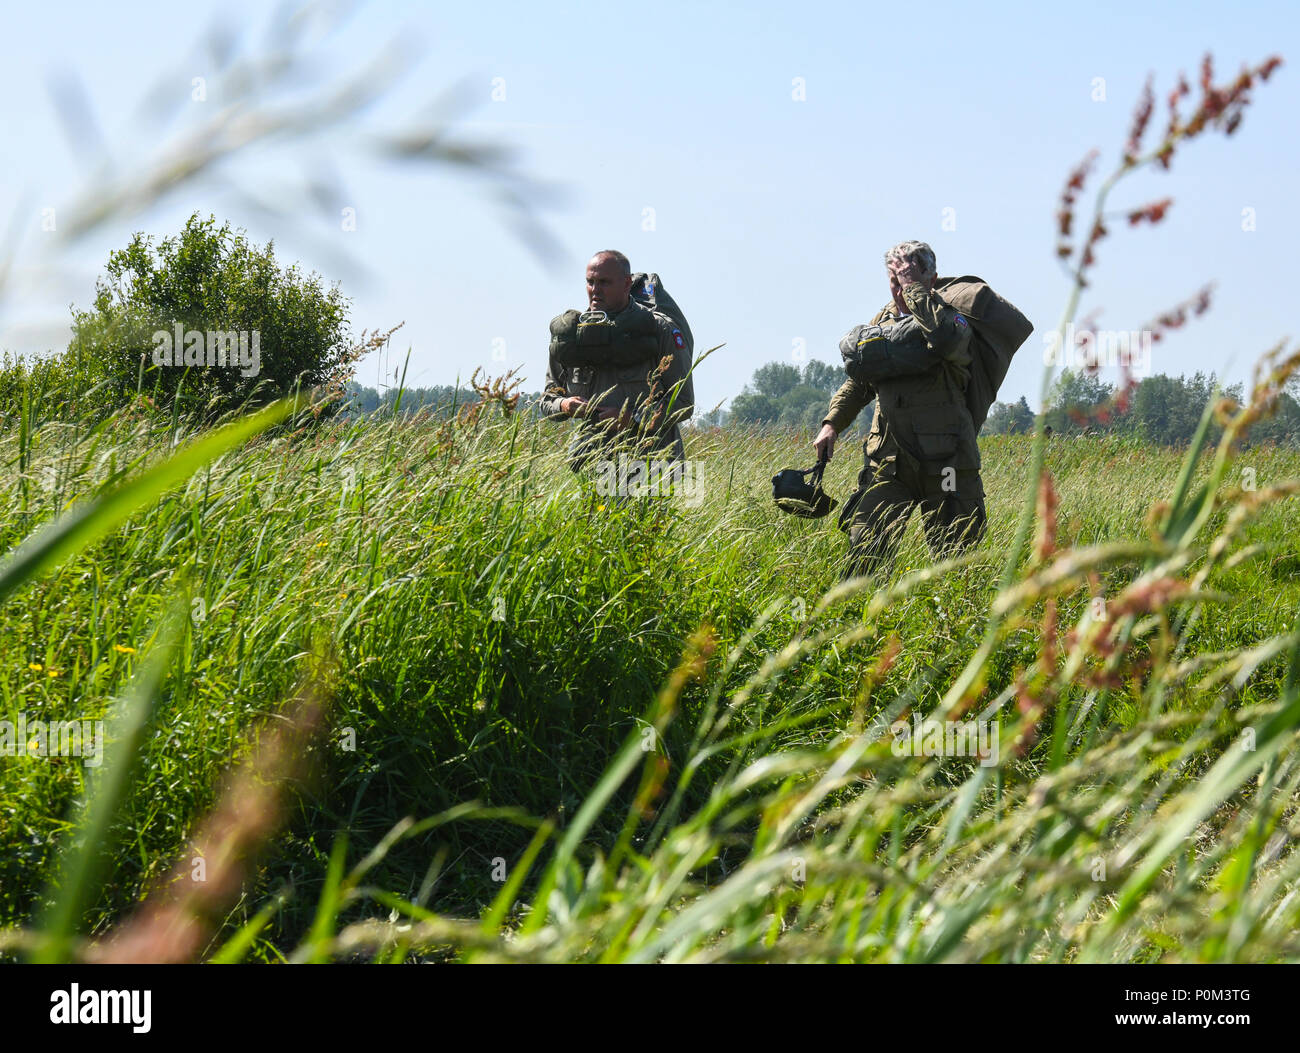 Paratroopers walk through thick brushes of grass from the landing zone June  3 after completing the D-Day 74 airborne operation near  Sainte-Mere-Elglise, France. This year marks the 74th anniversary of  Operation Overlord,